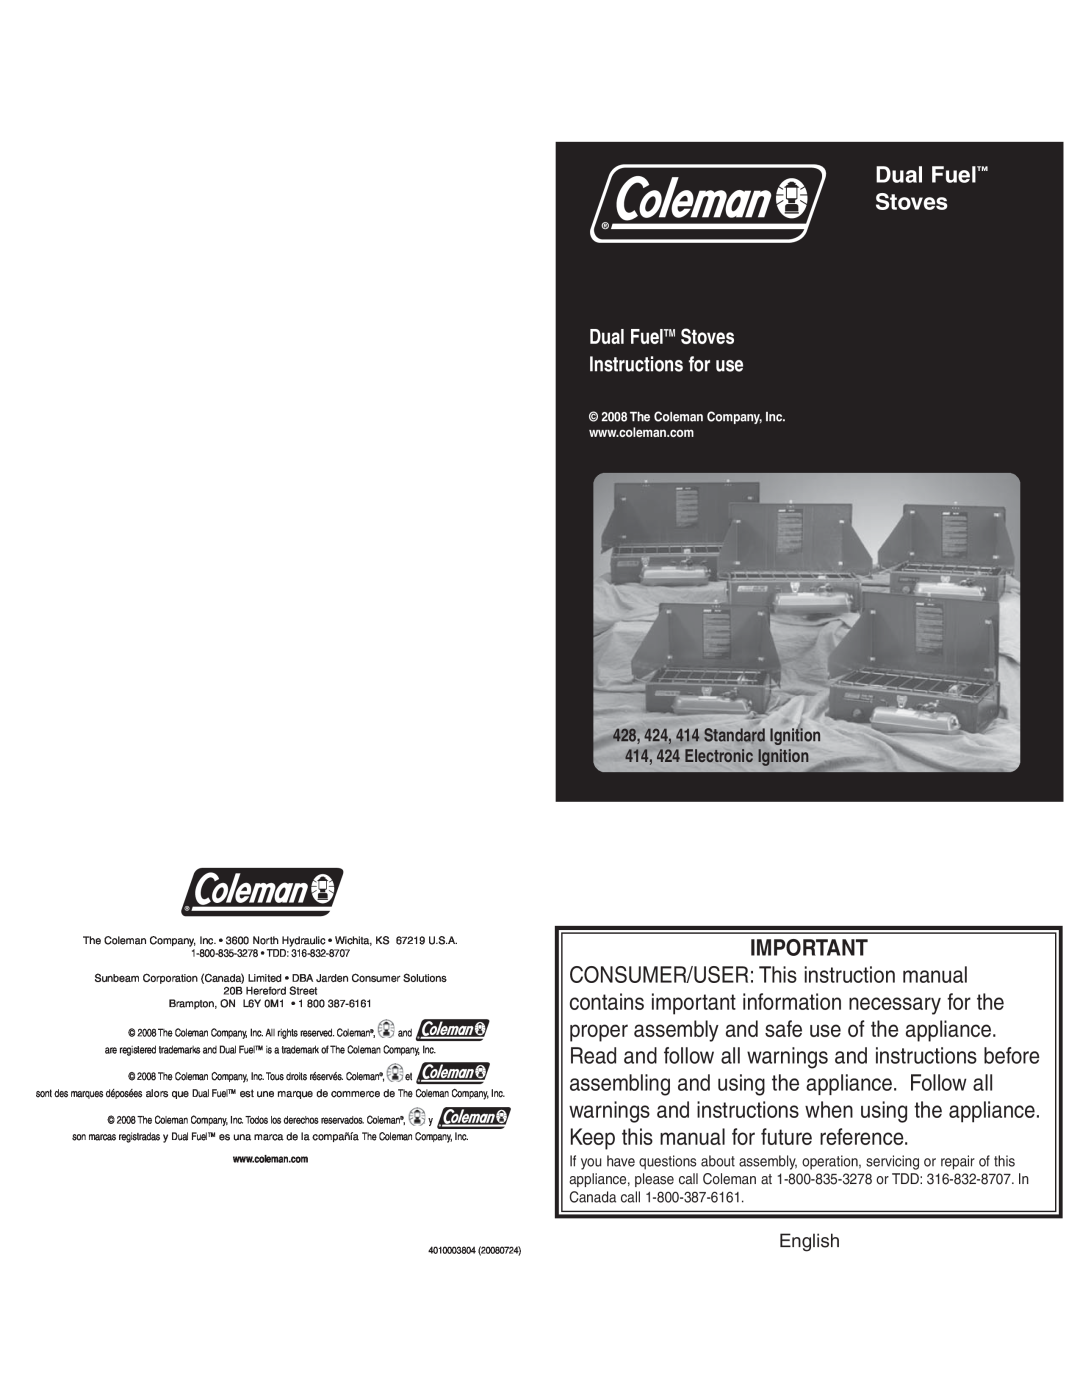 Coleman 4010003804 instruction manual Dual Fuel Stoves, Dual FuelTM Stoves Instructions for use, English 